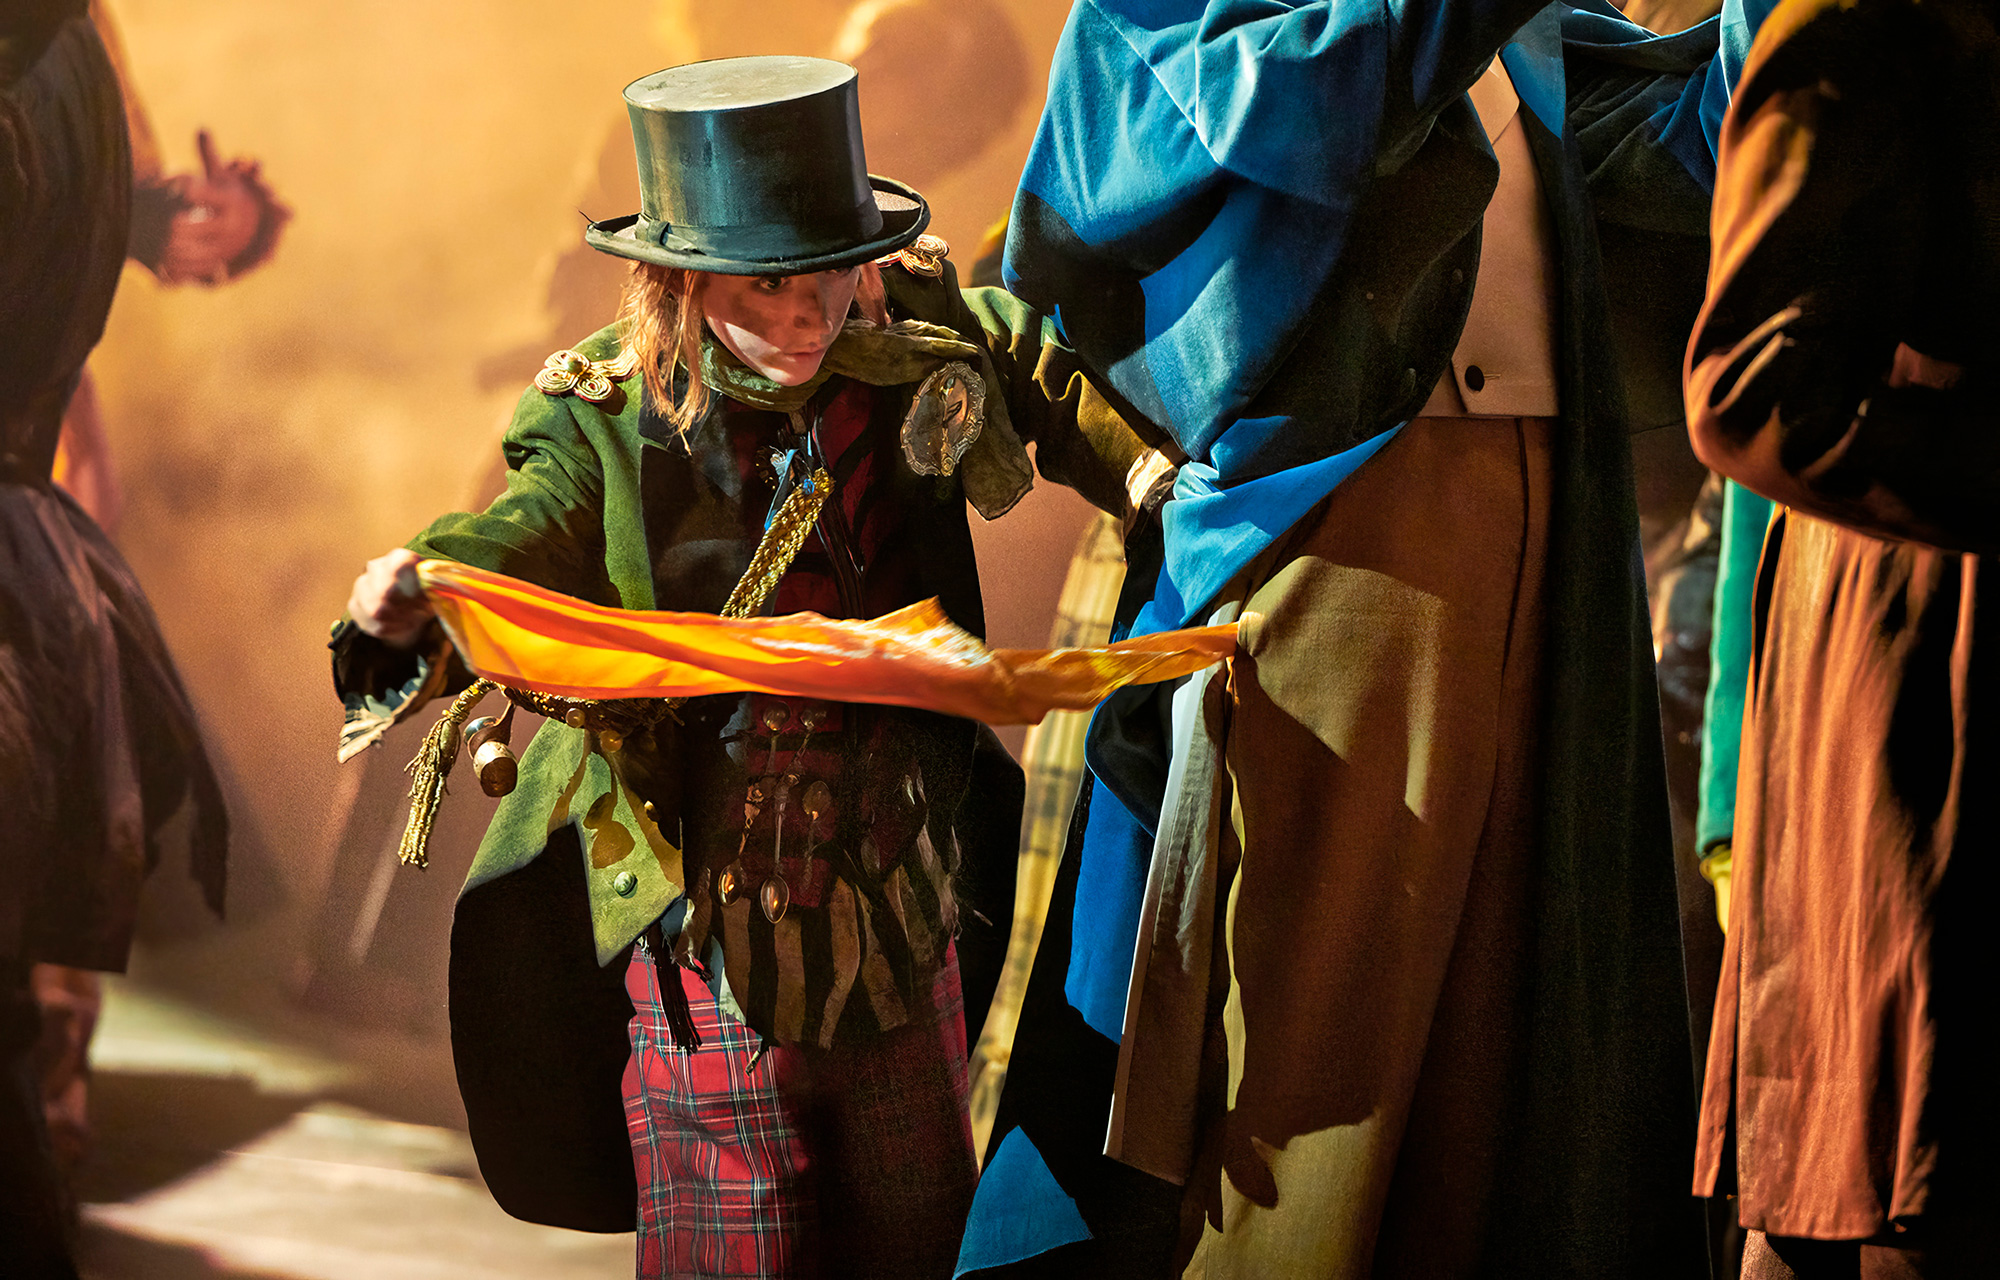 At the center stands a boy dressed in colorful clothing and wearing a hat. The individual holds a piece of fabric in orange and yellow. The person's face is hidden, but we can see that they are wearing a green jacket adorned with medals and red-checkered pants. A top hat adorns their head. Around the central figure, there are other people, also dressed in different costumes. Their attire includes blue and brown fabric. The background is misty, lending the picture a dramatic mood. The lighting is warm and casts shadows that highlight the details of the costumes and the environment.